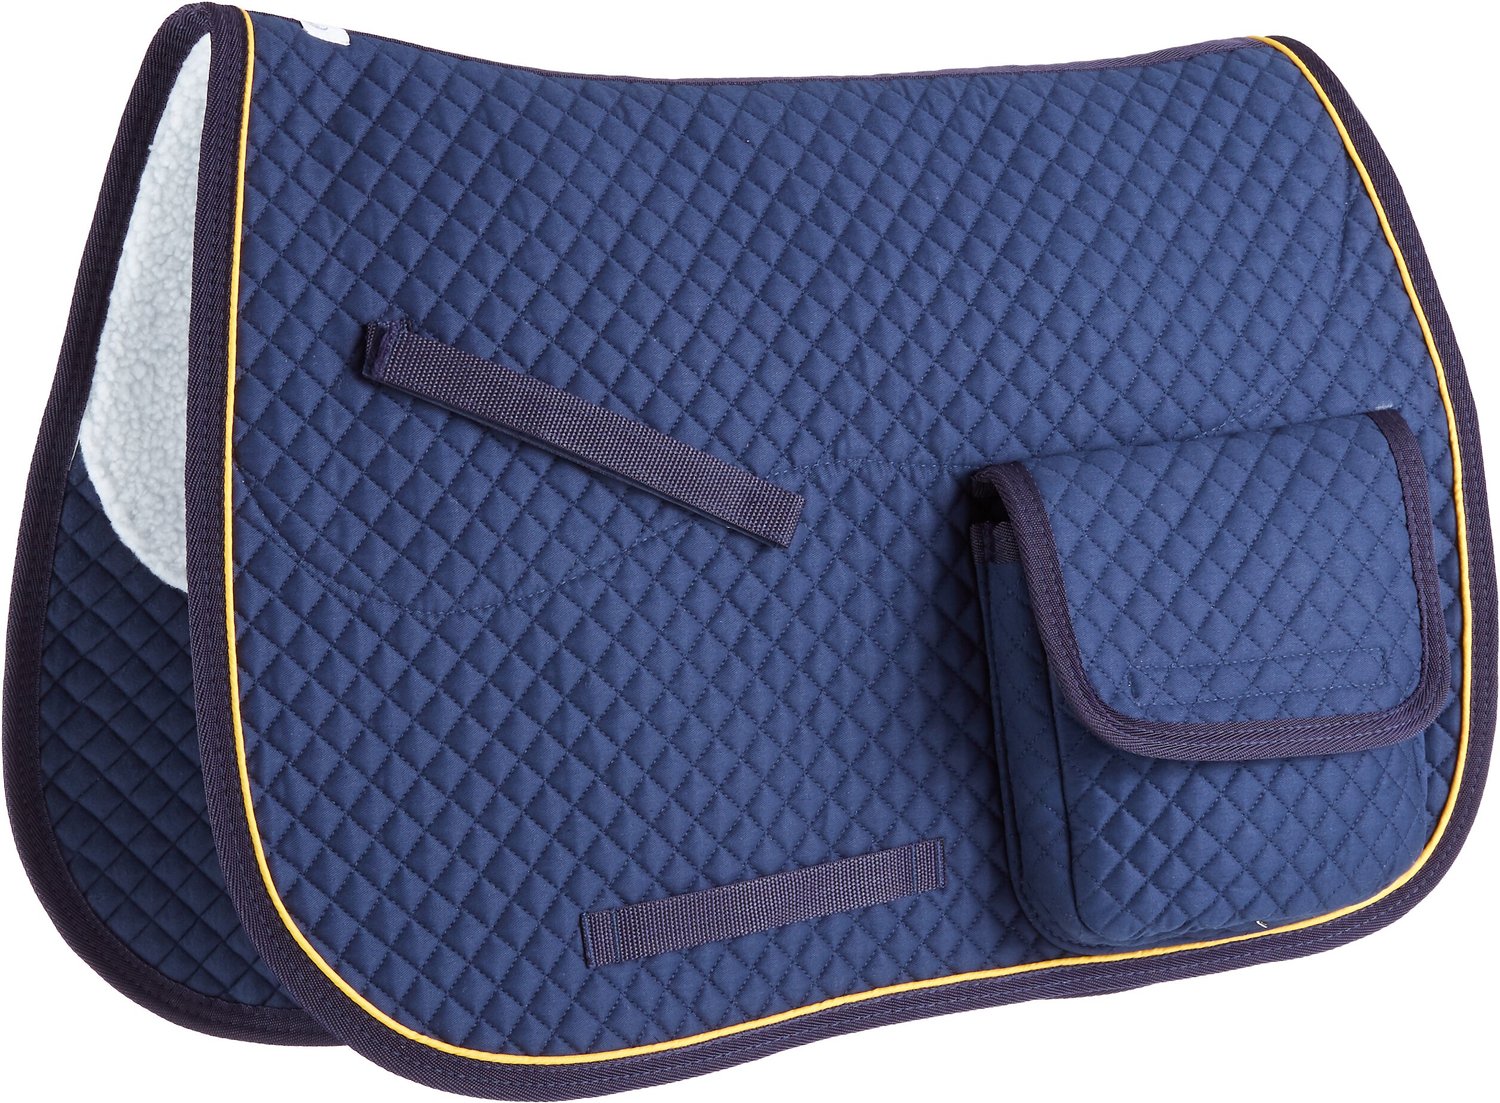 Details about   DERBY ORIGINALS CHEETAH QUILTED ENGLISH SADDLE PAD 22.5" X 43" 